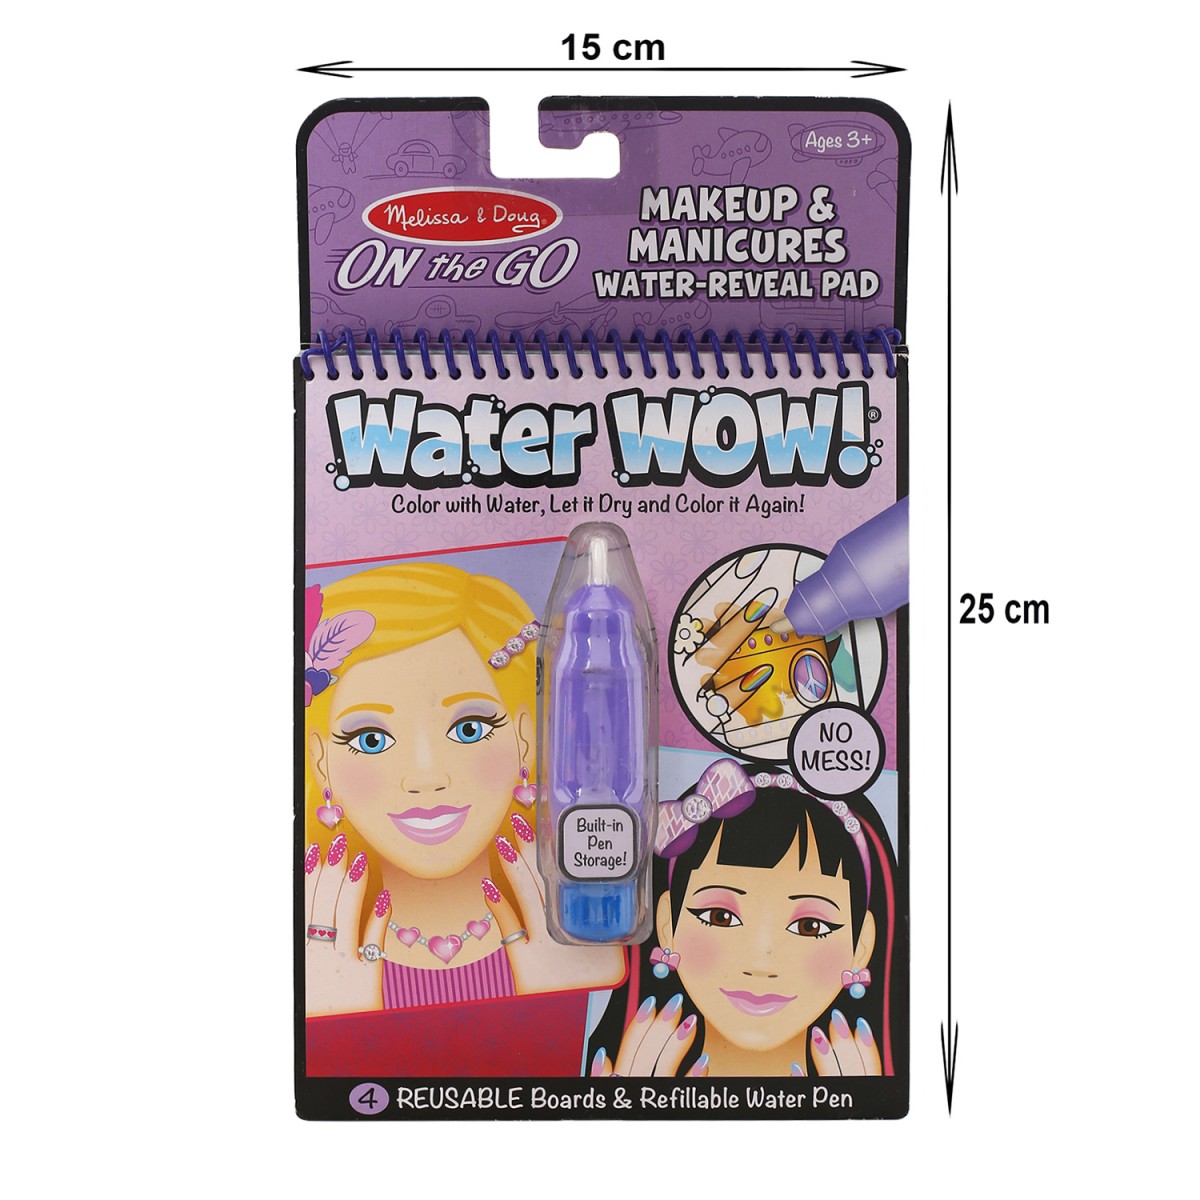 Melissa & Doug On The Go Water Wow! Makeup & Manicures (Reusable Water-Reveal Activity Pad, Chunky-Size Water Pen) School Stationery for Kids age 3Y+ 